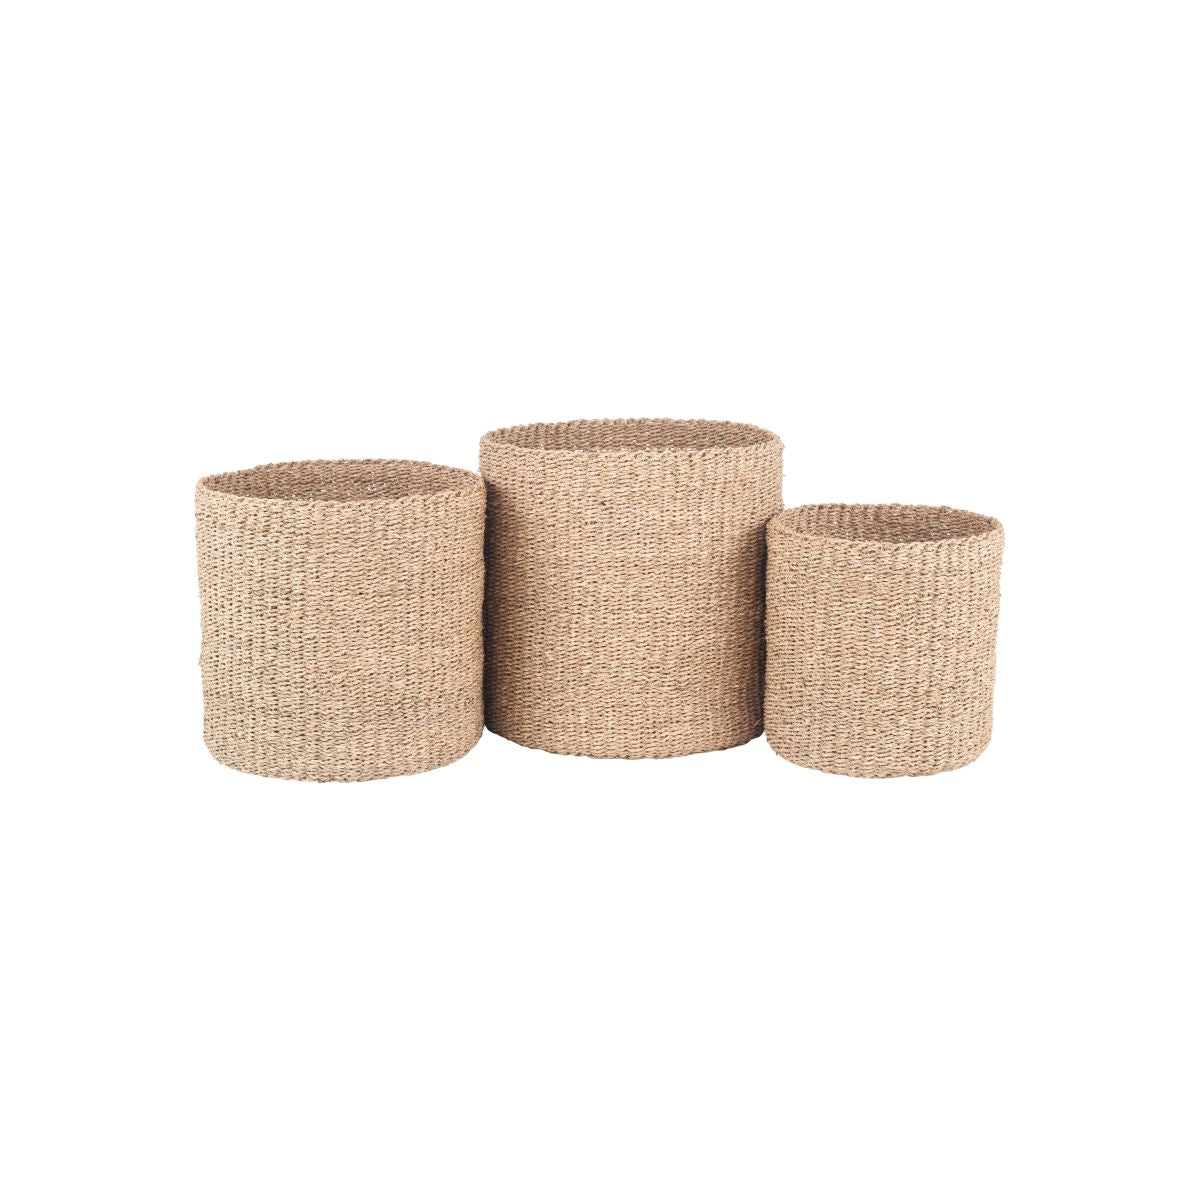 S/3 Woven Natural Seagrass Round Baskets